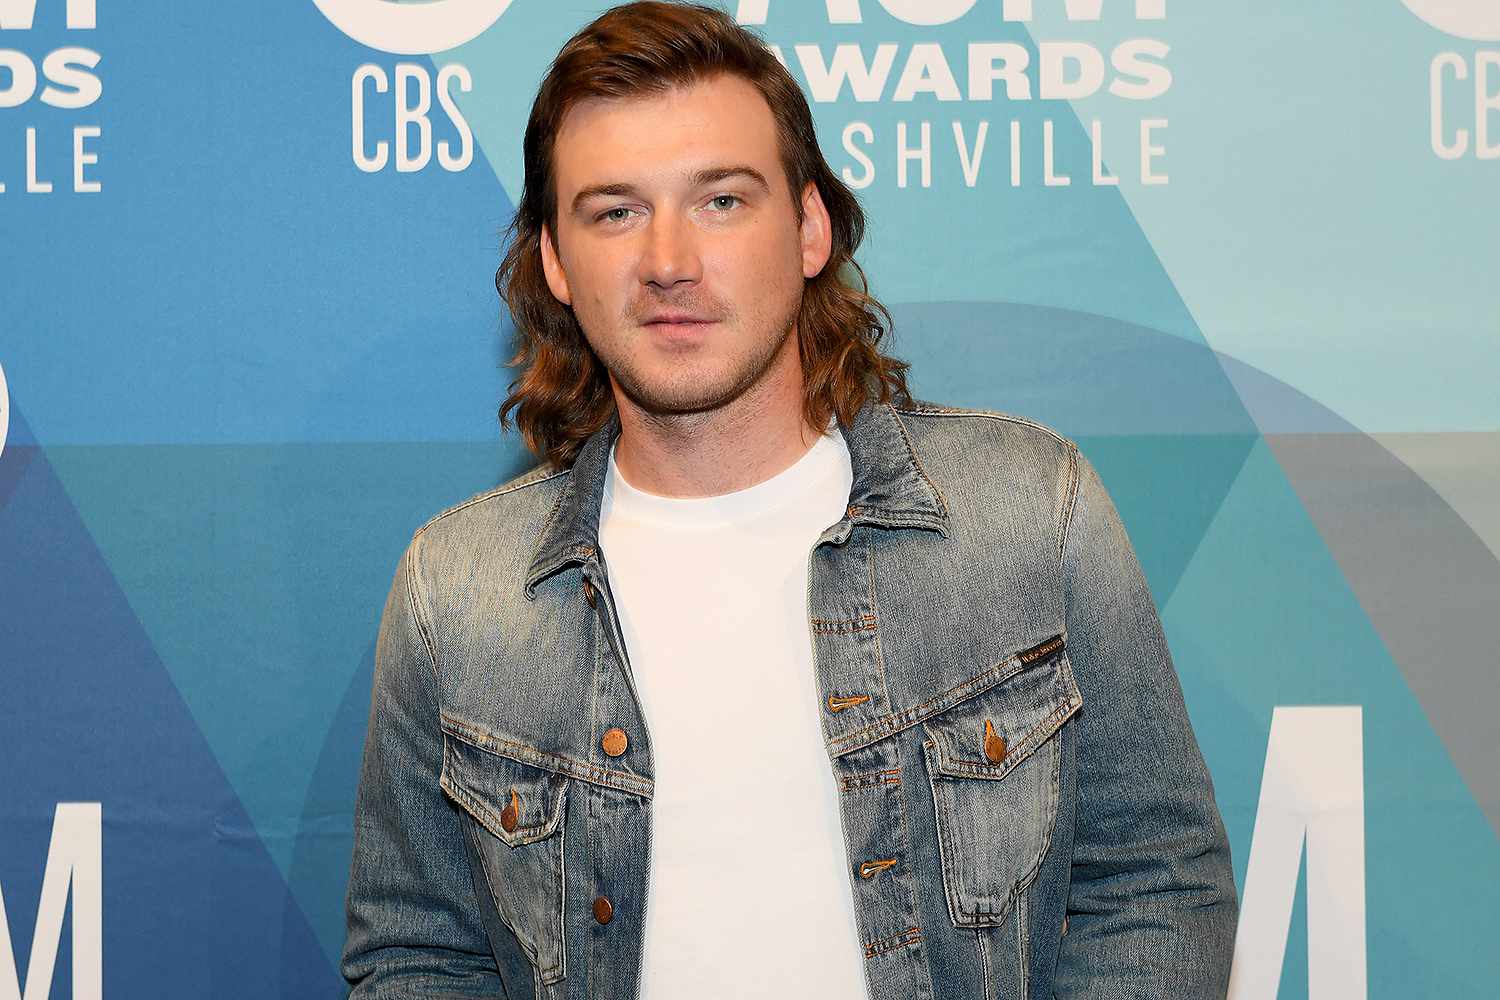 Morgan Wallen Re-Records Song To Thwart Former Collaborators